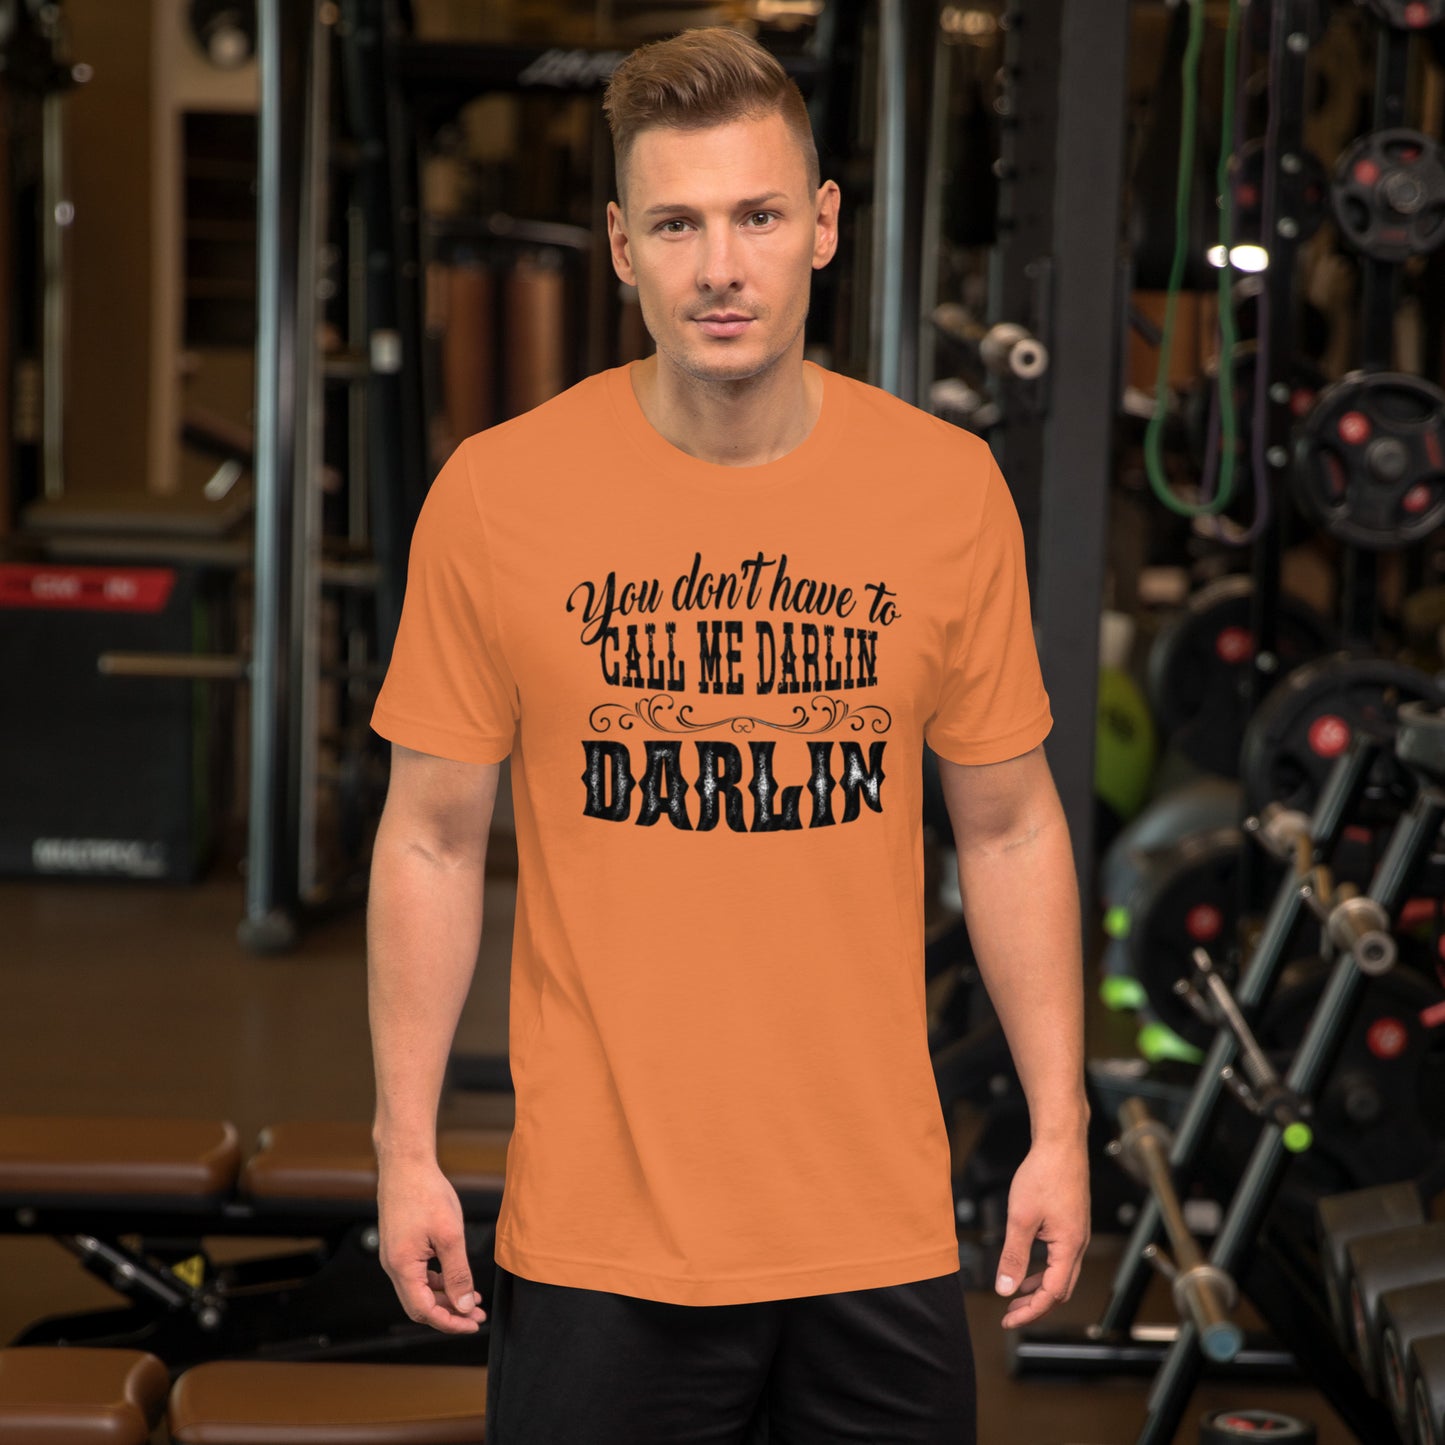 Call me Darlin - Get Your Twang On with Classic Country Tees - The Ultimate Unisex T-Shirt for True Country Souls! - Classic Country Tees